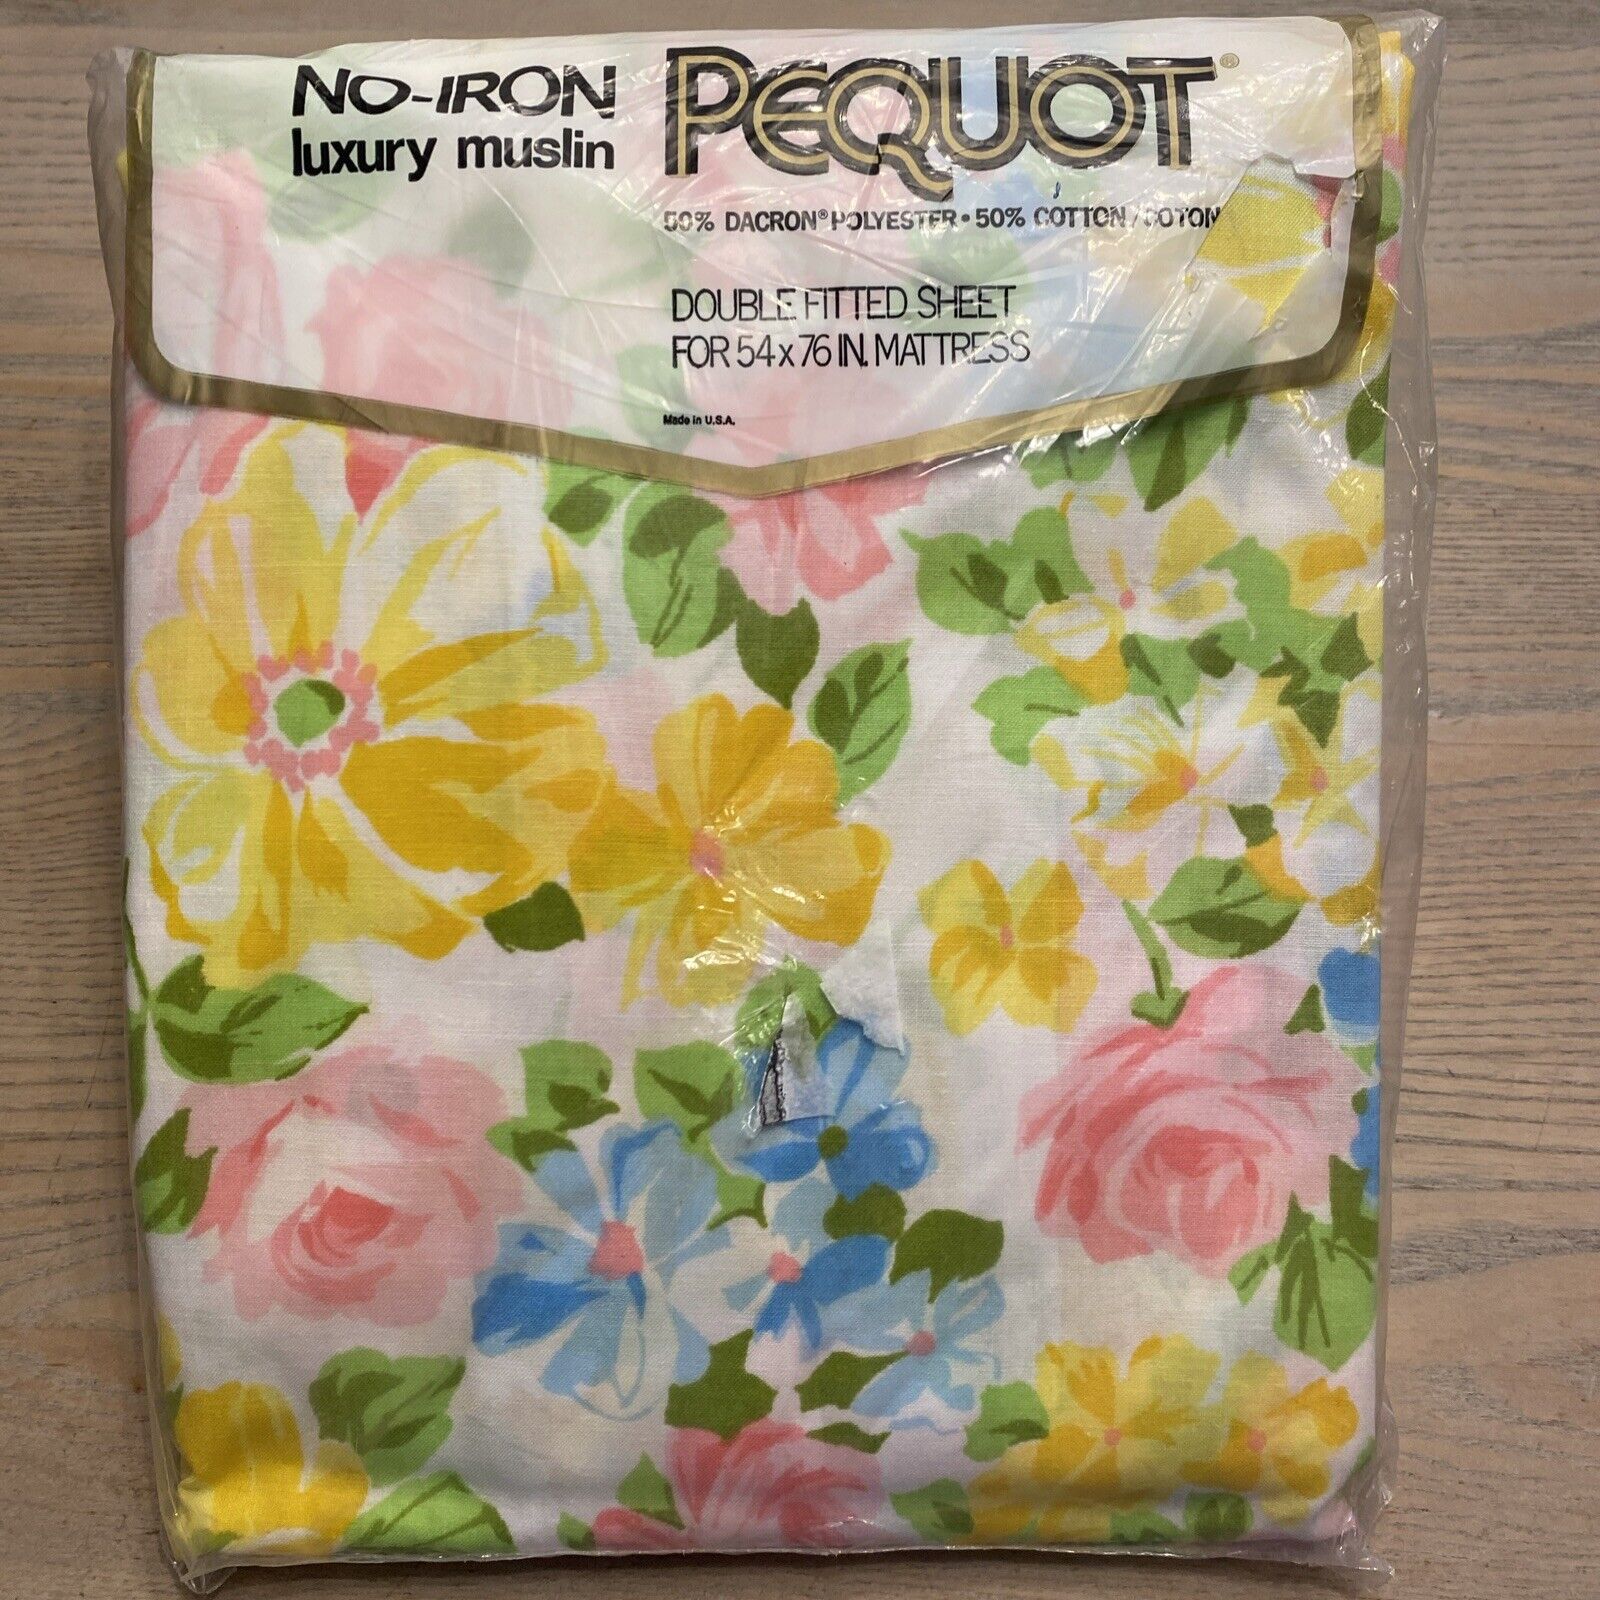 Vtg Pequot No Iron Luxury Muslin Double Fitted Sheet 54x76 Pink Yellow Floral